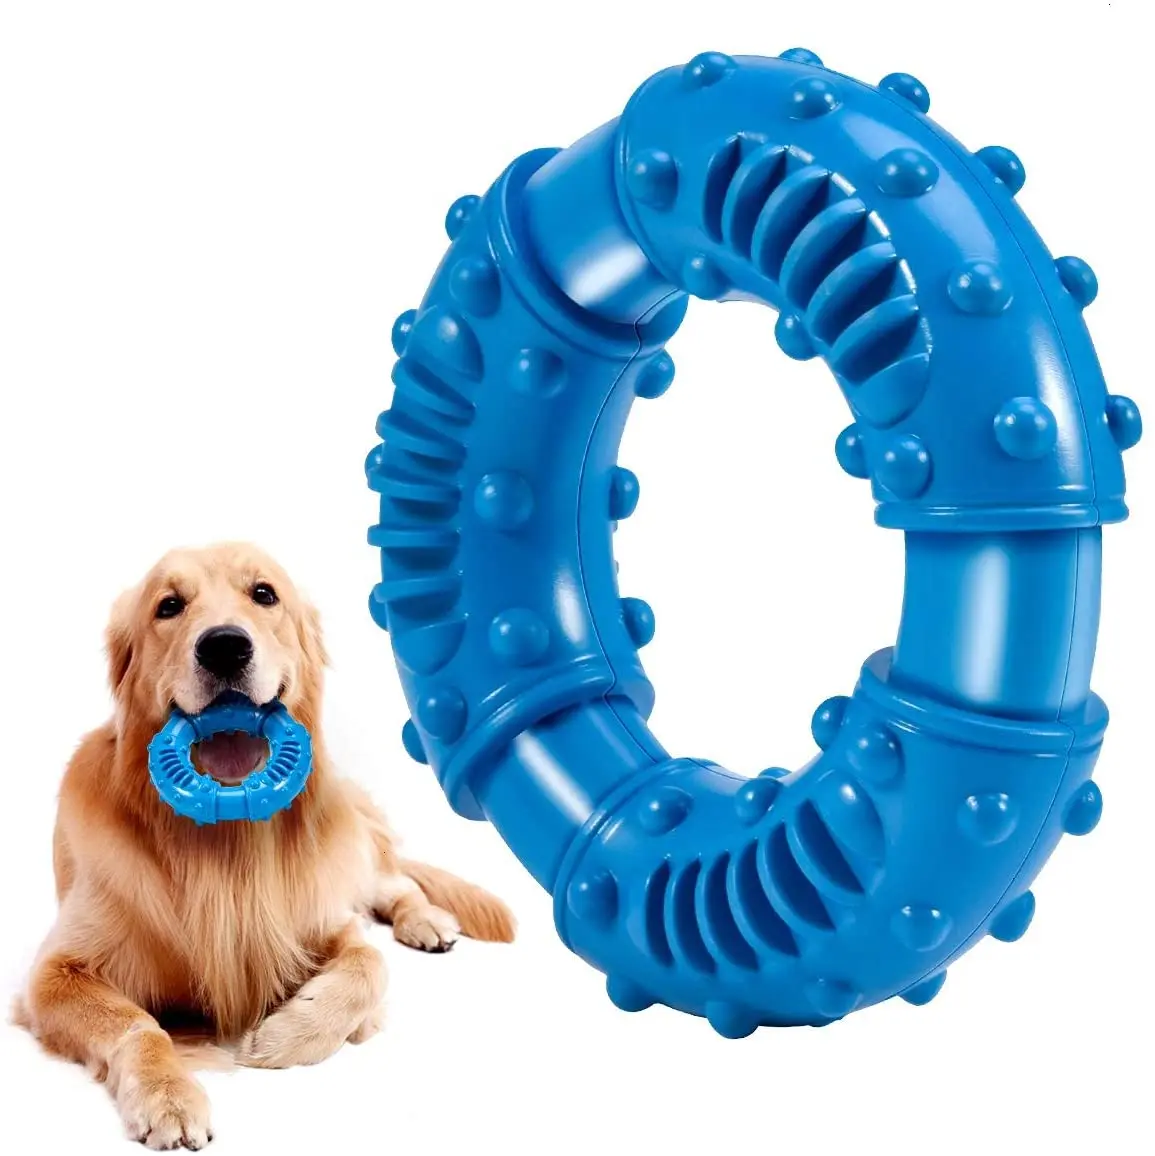 

Dog Chew Toys for Aggressive Chewers Large Breed Non-Toxic Natural Rubber Long Lasting Indestructible Dog Toys